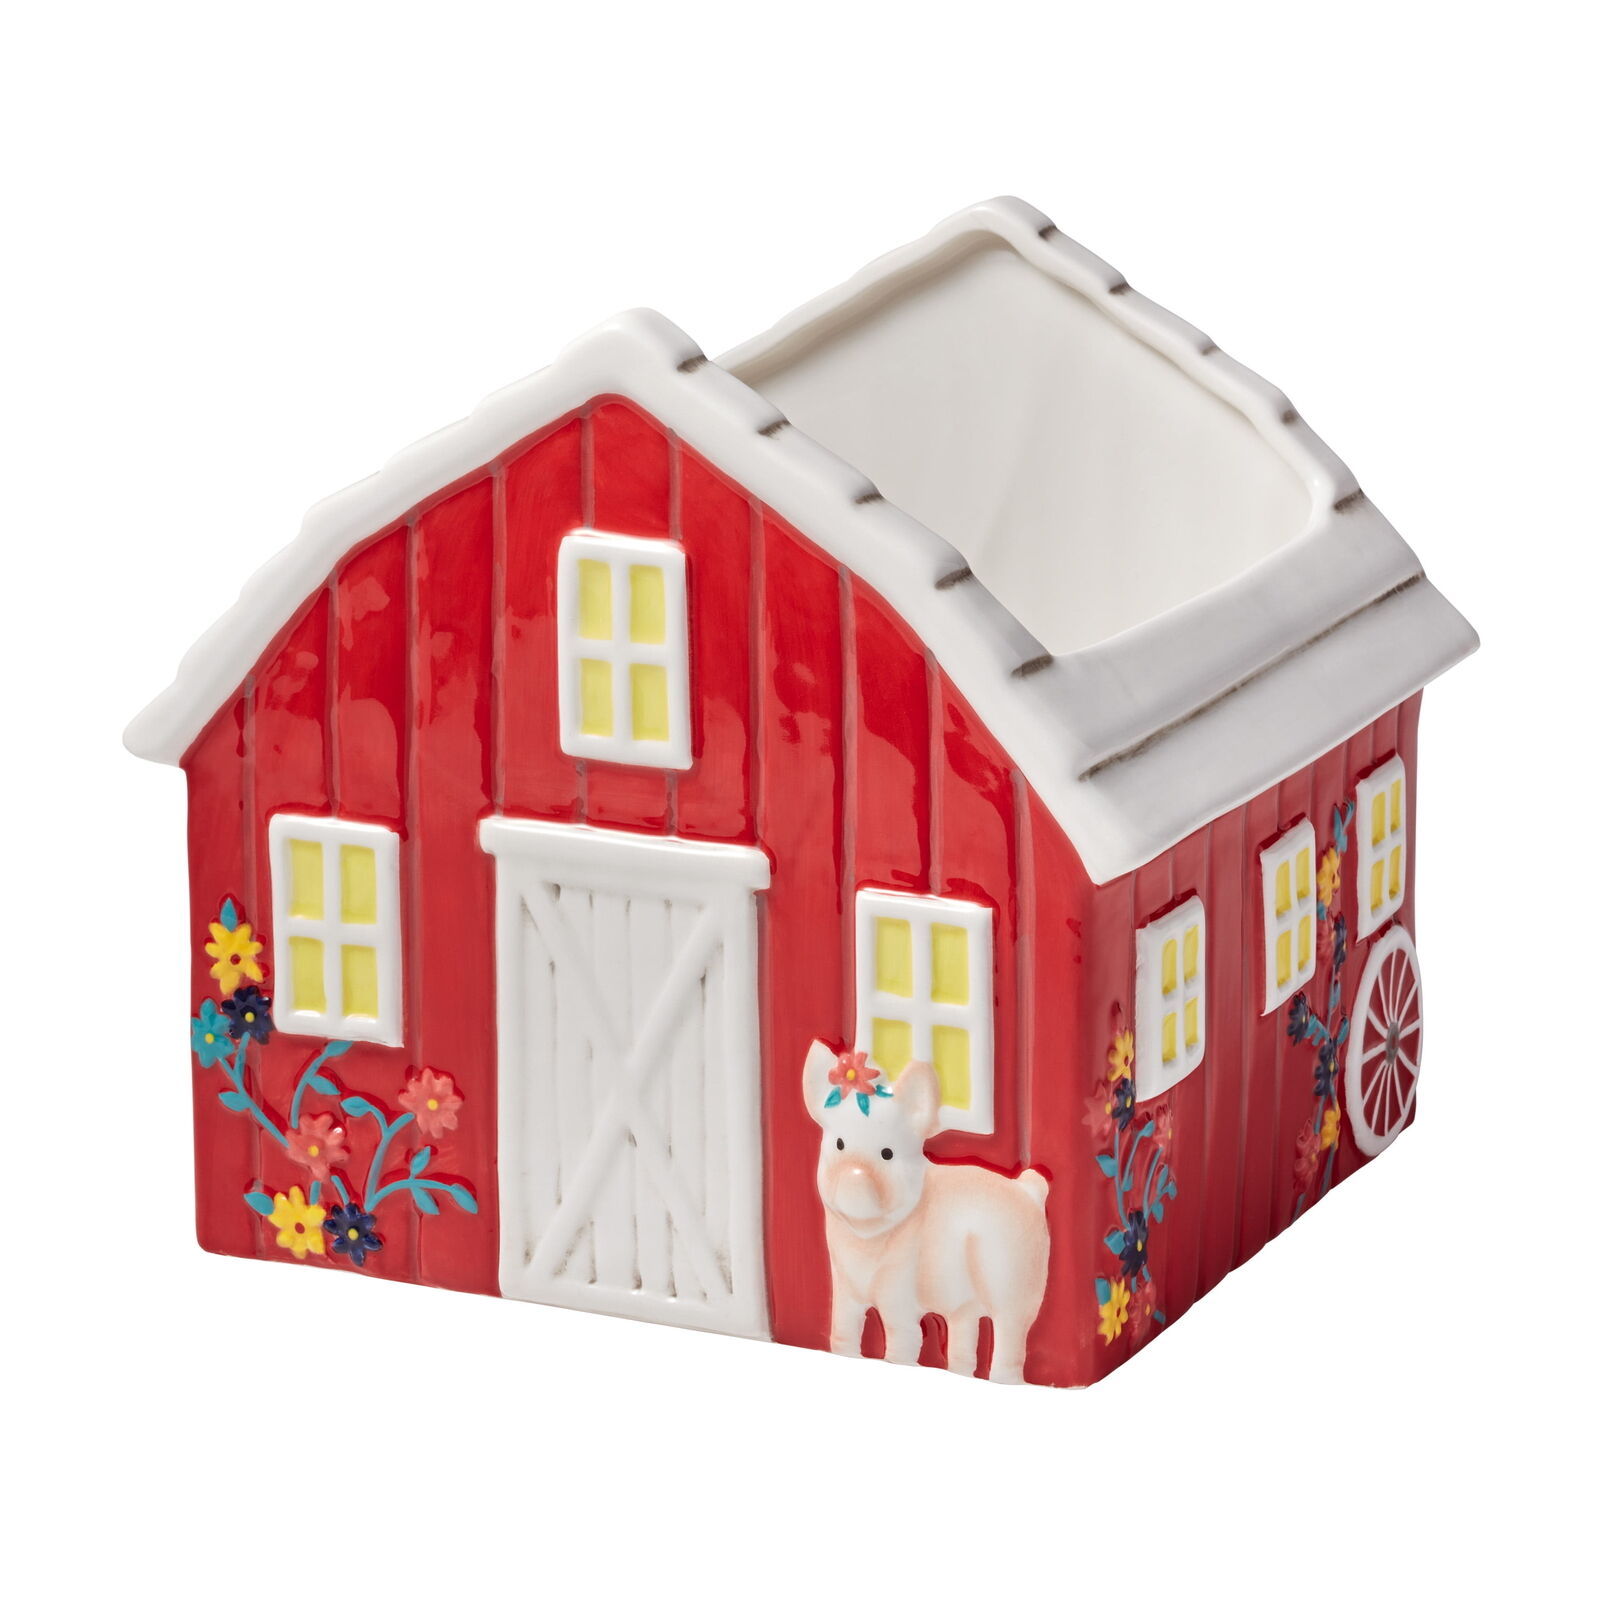 * The Pioneer Woman Red Barn Ceramic Planter